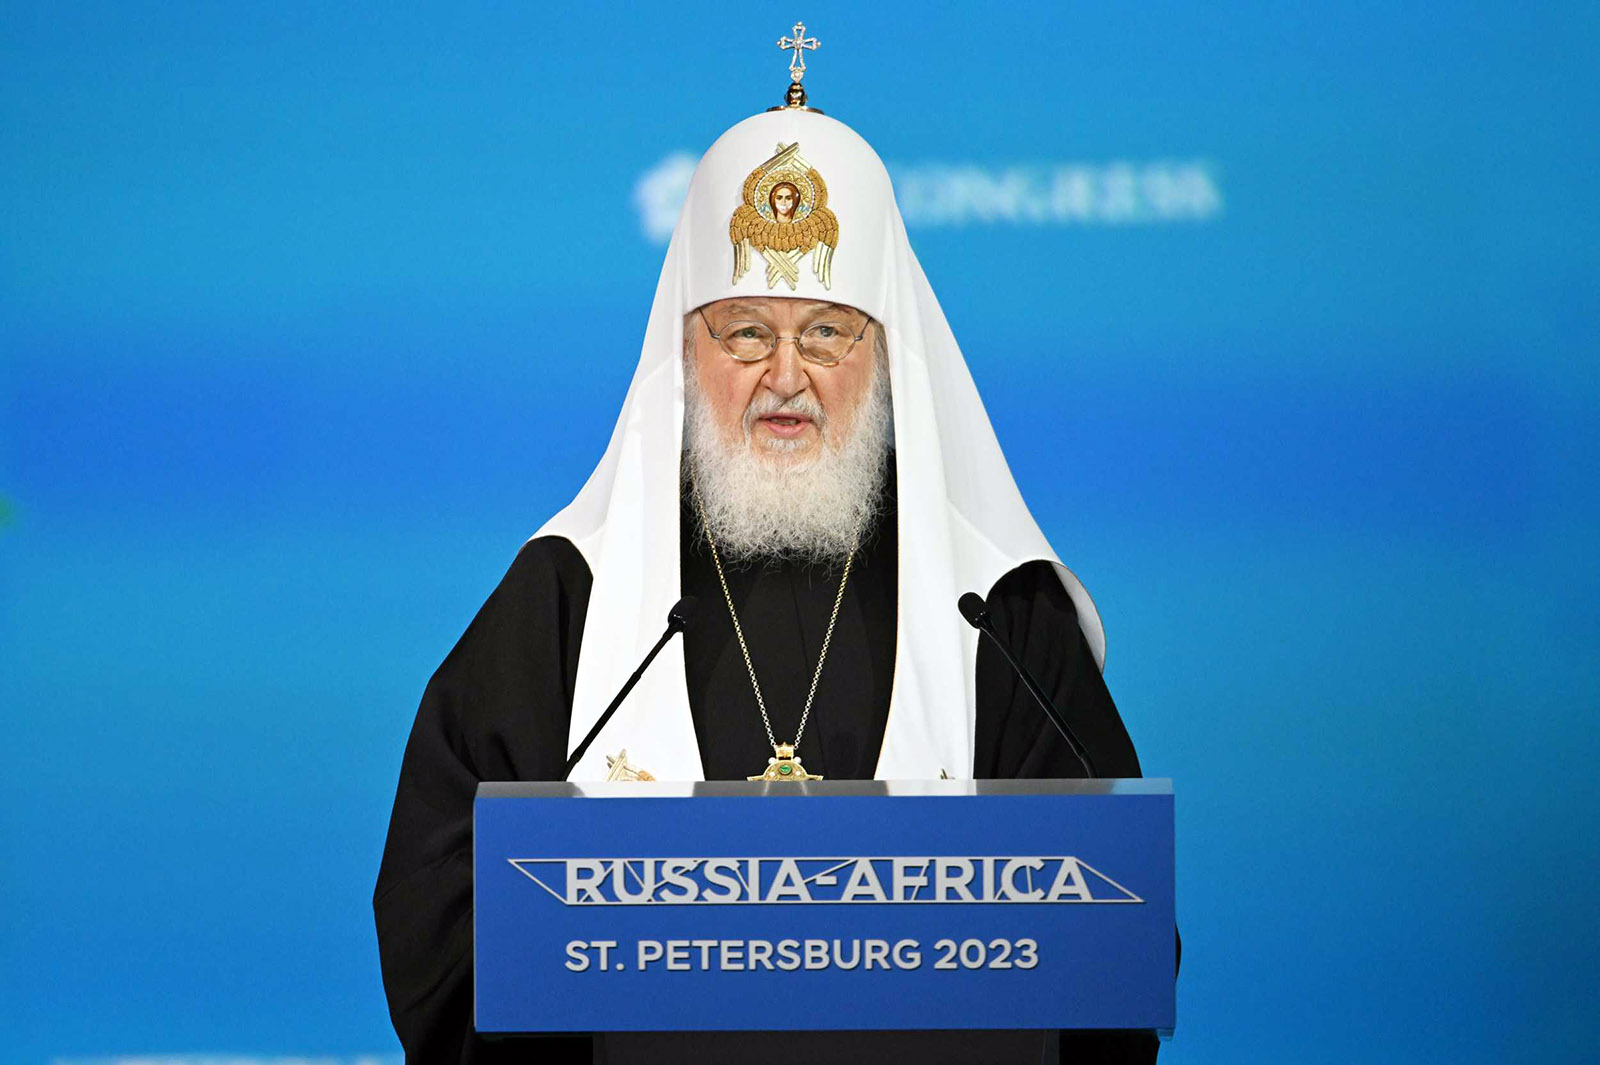 Patriarch Kirill addresses the Russia-Africa Summit in St. Petersburg, Russia, July 27, 2023. Photo courtesy Patriarch of Moscow and All Russia